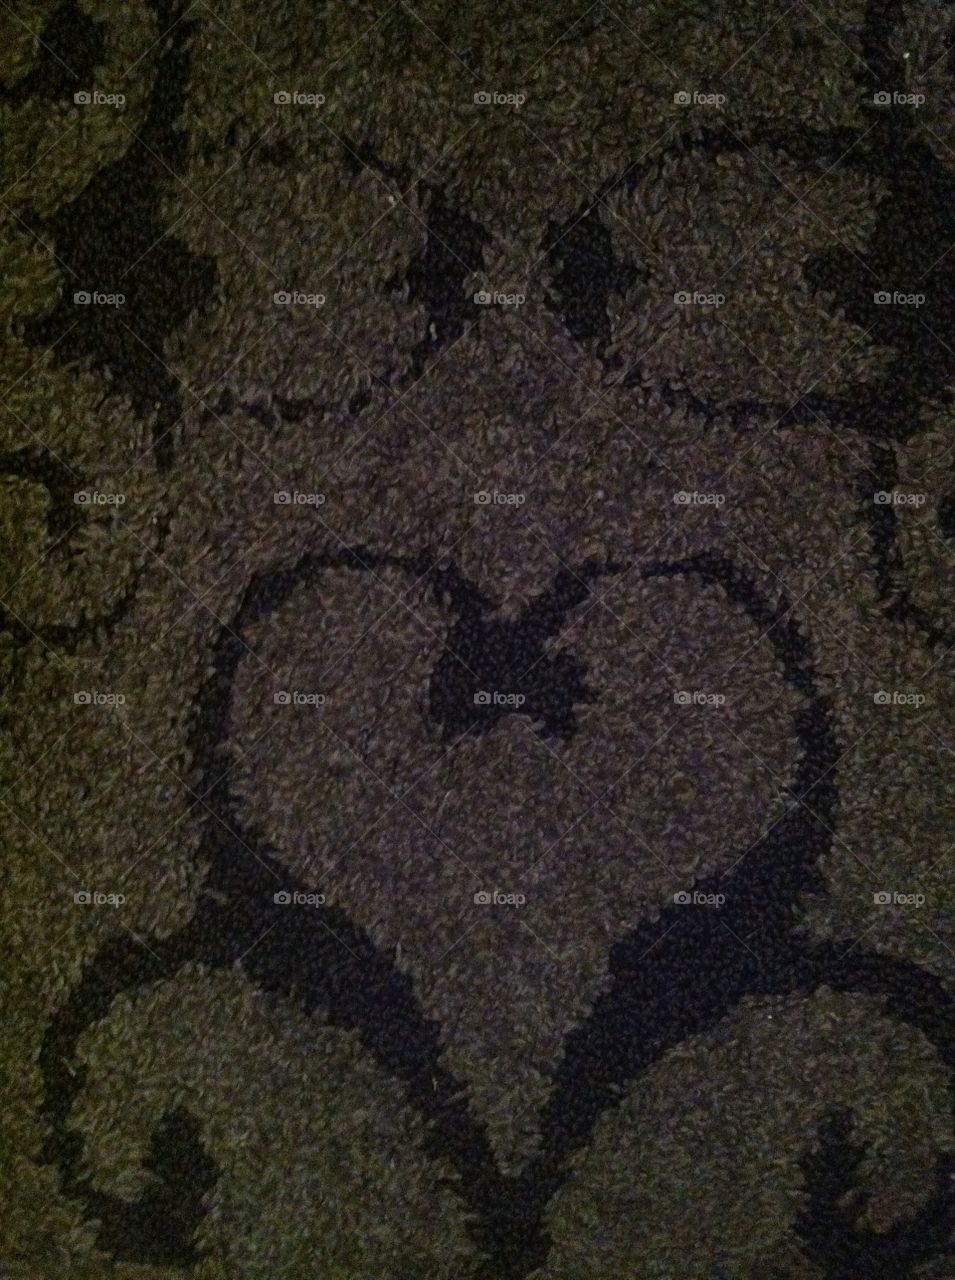 Love Hearts on Carpet. Love hearts in a really nice pattern its so simple yet so powerful.